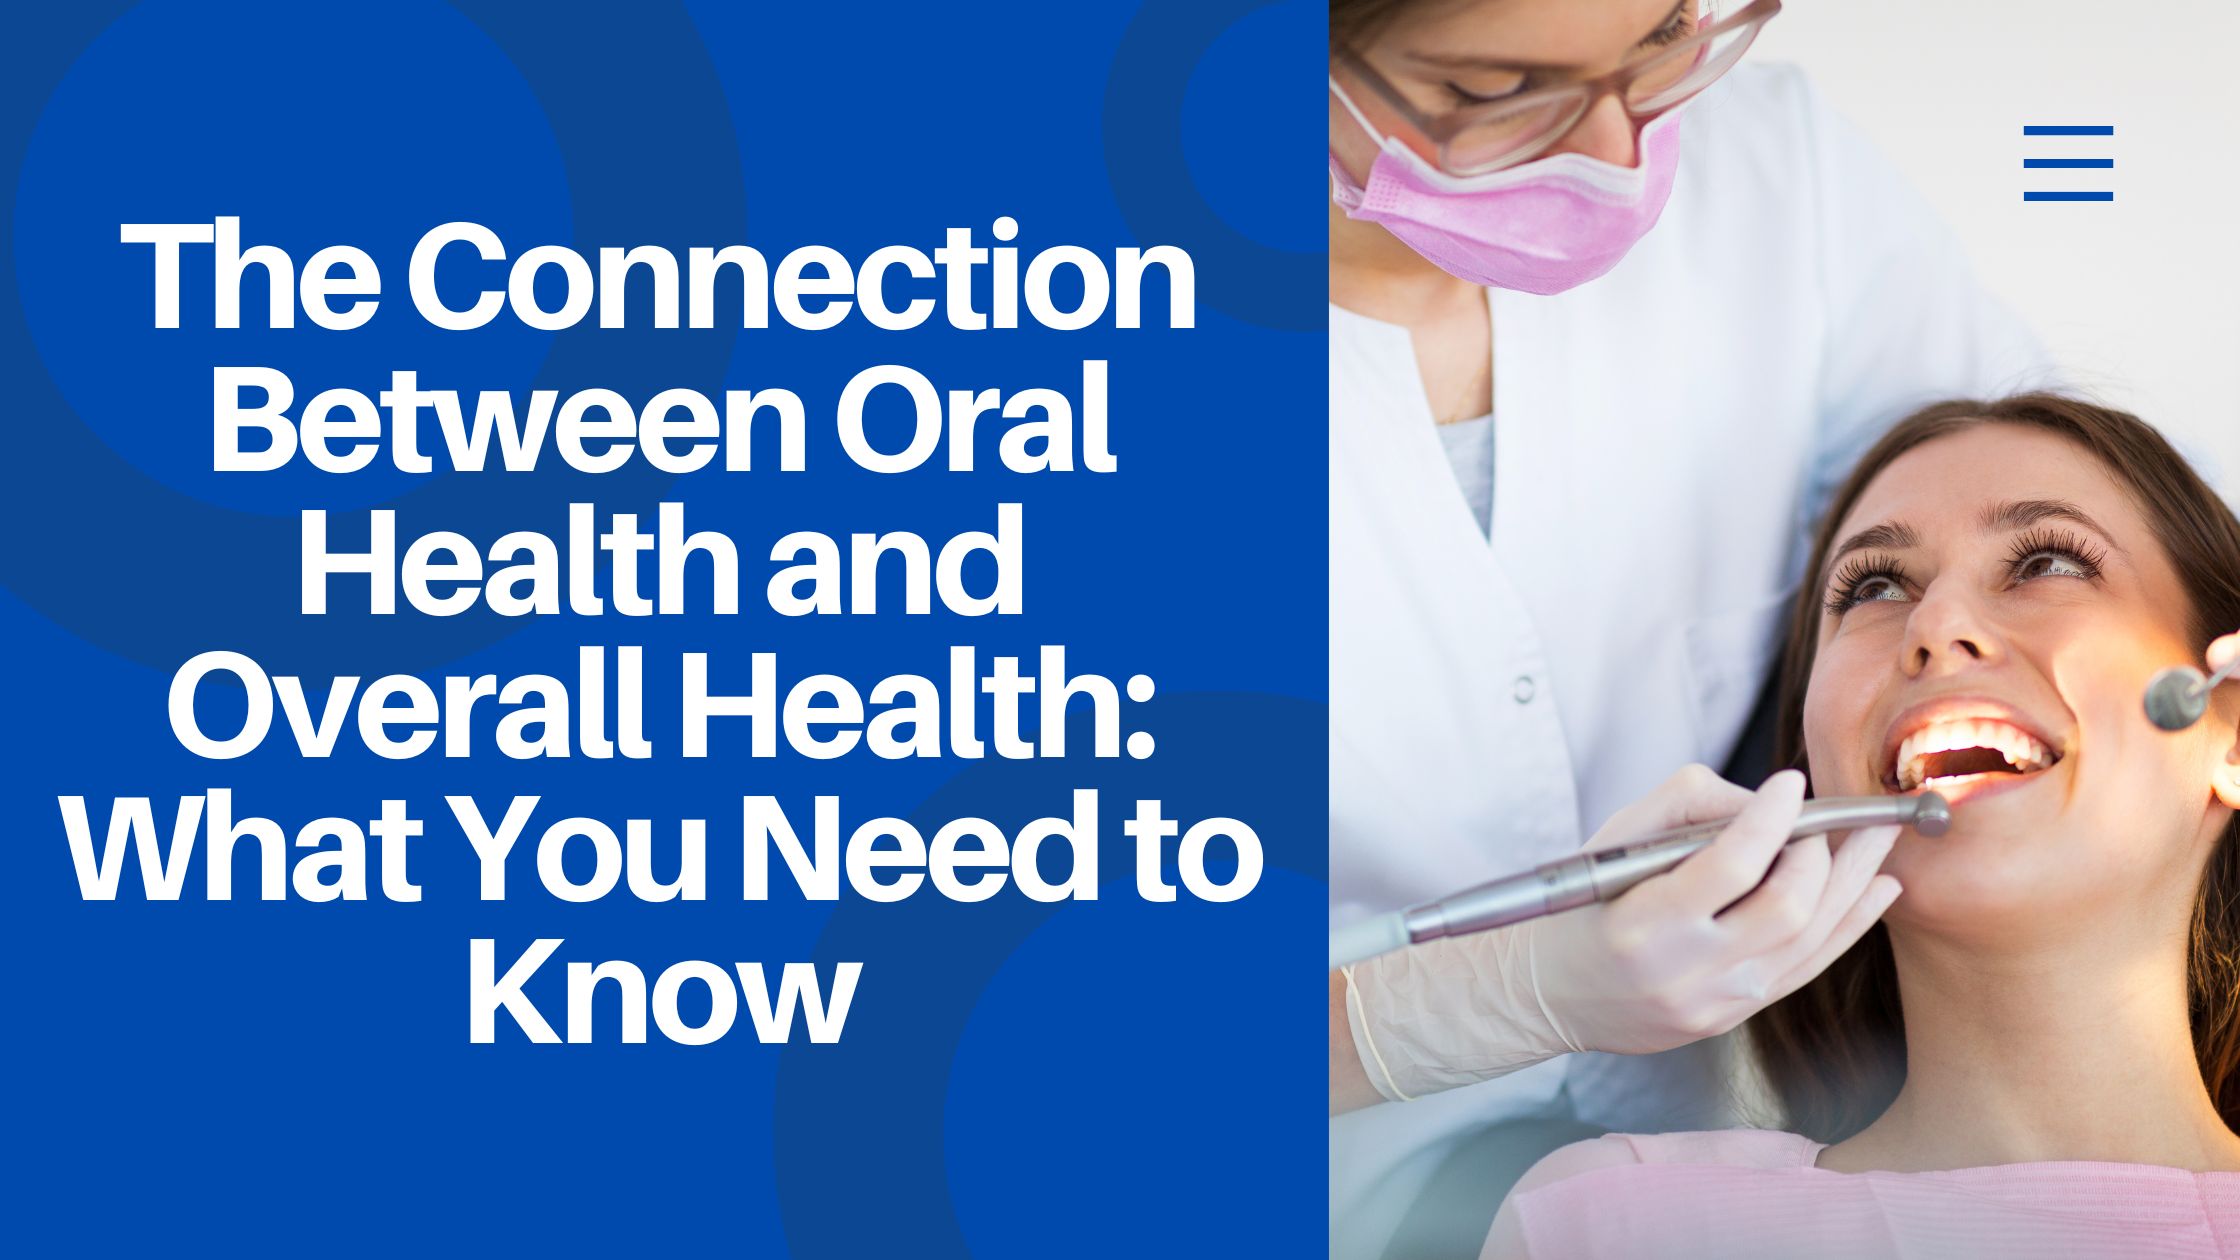 The Connection Between Oral Health and Overall Health: What You Need to Know